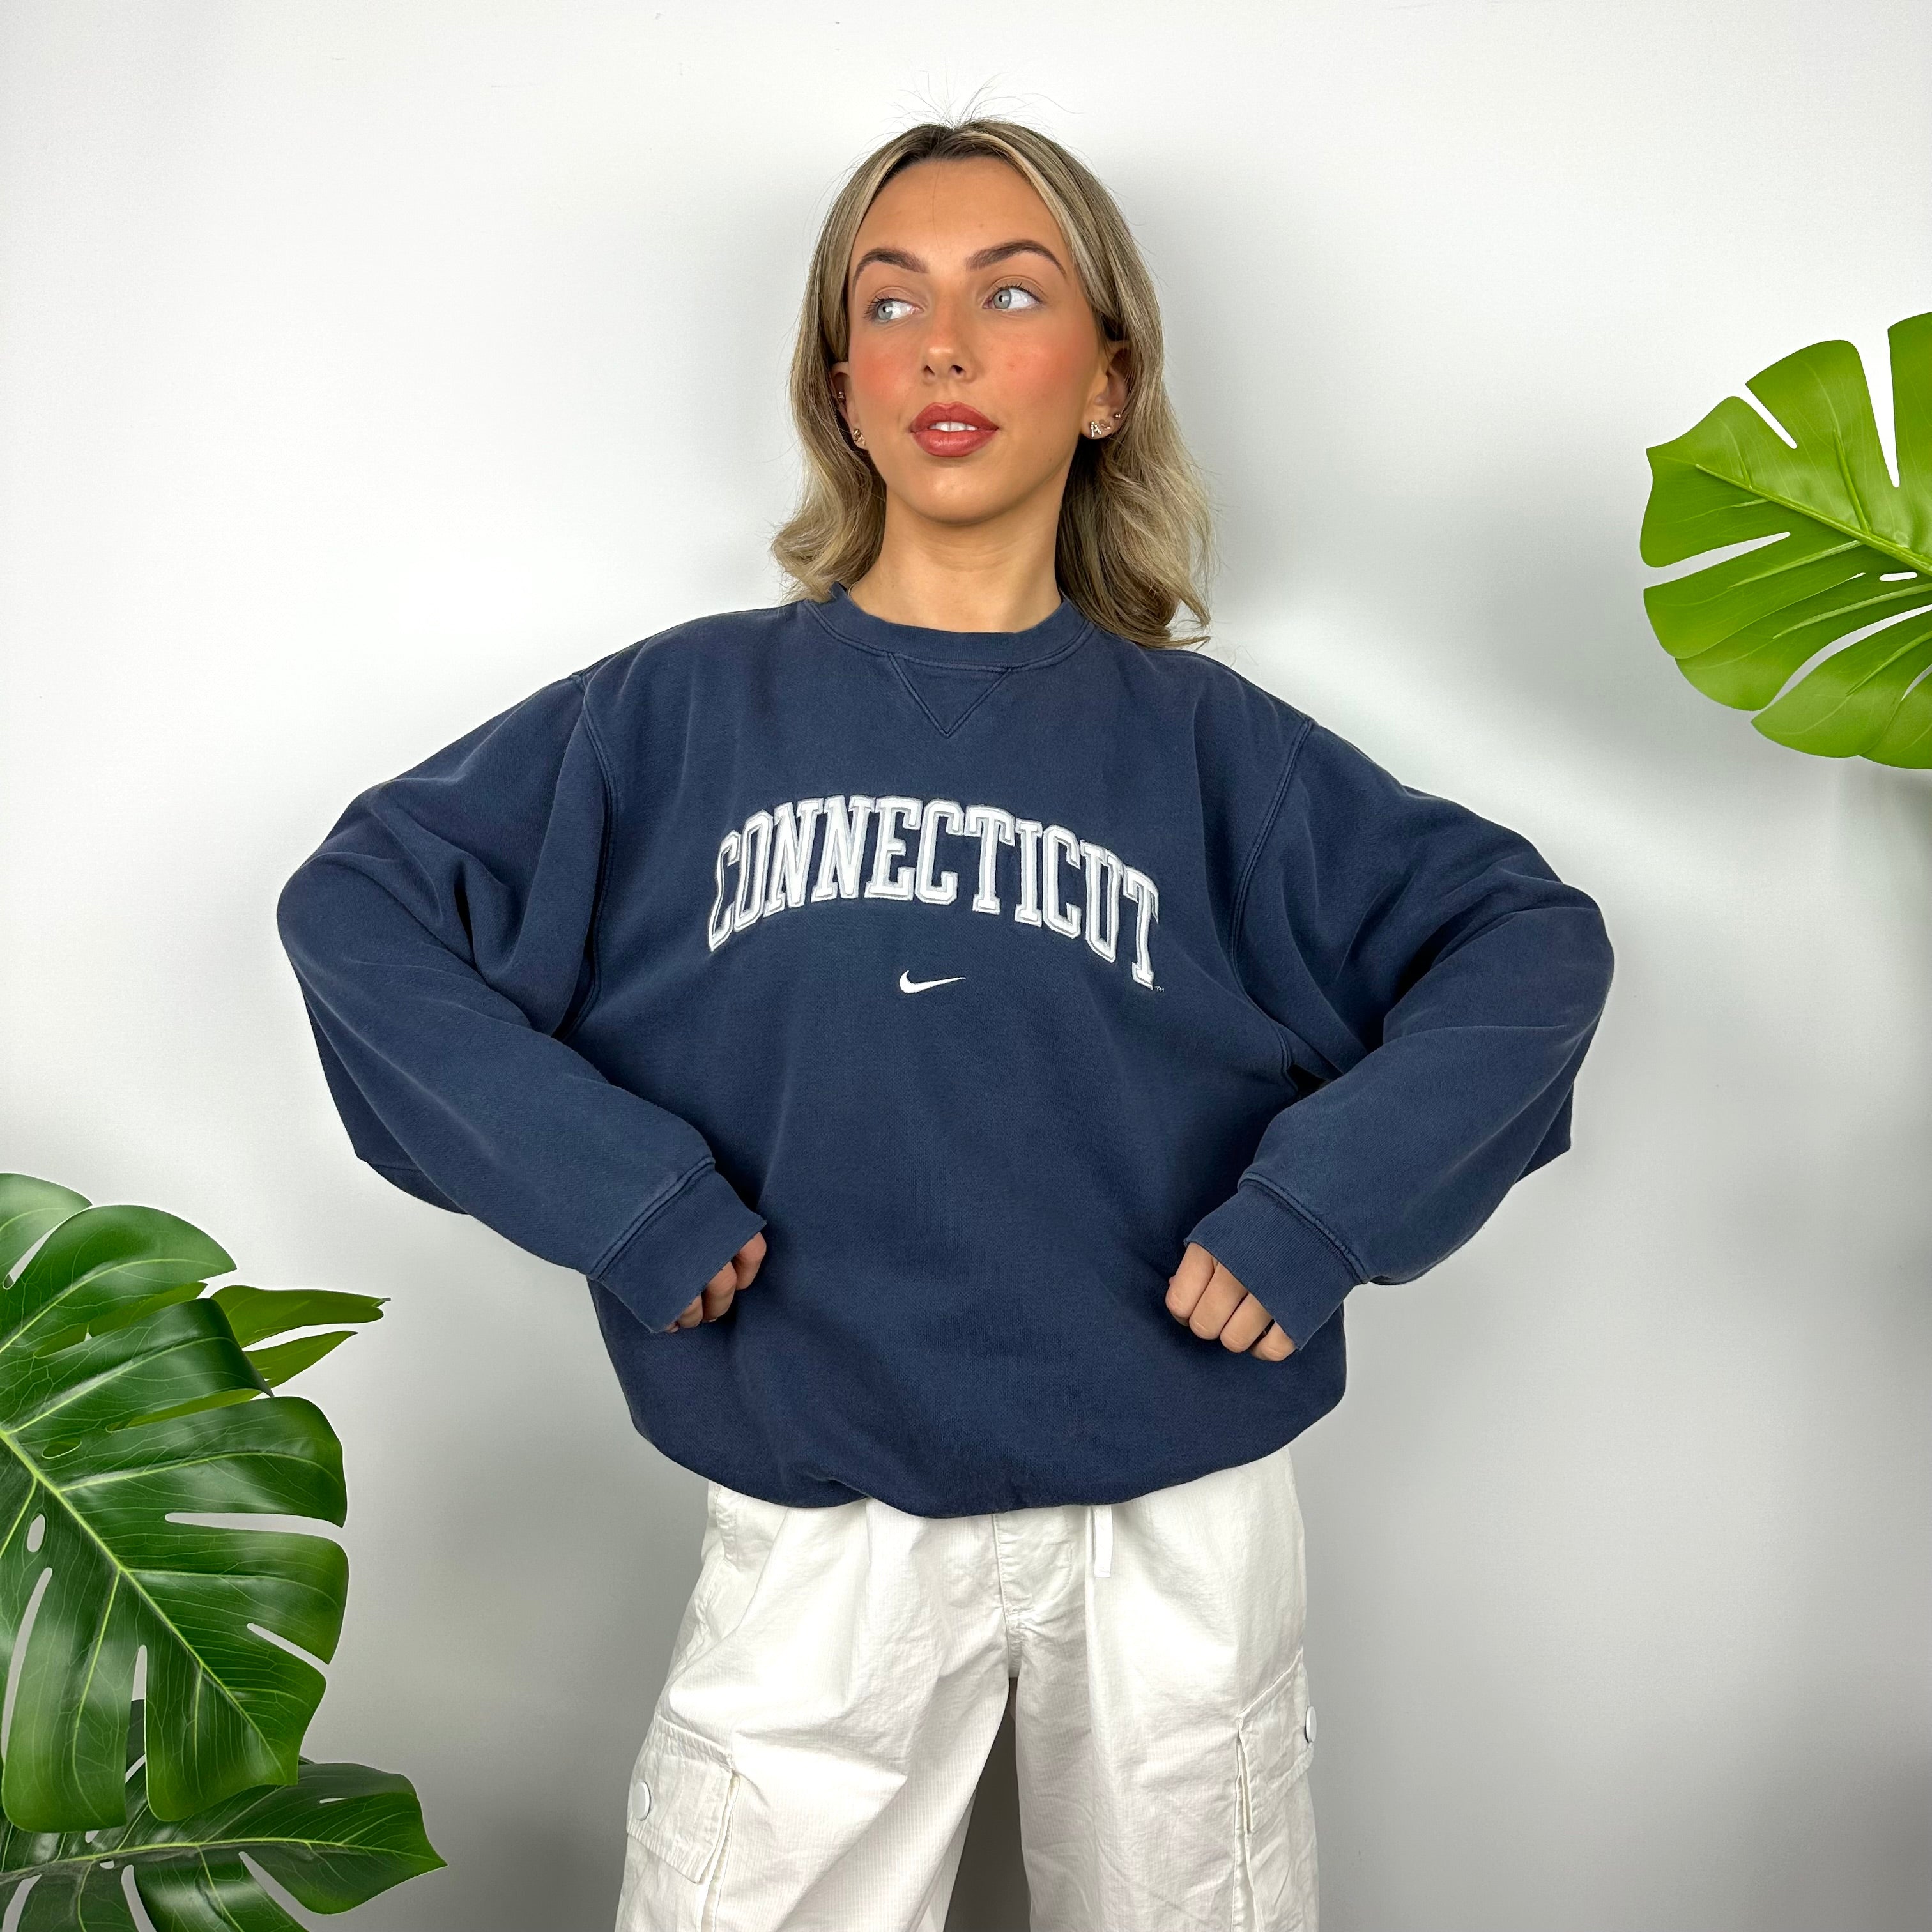 Nike x Connecticut Navy Embroidered Spell Out Sweatshirt (M)